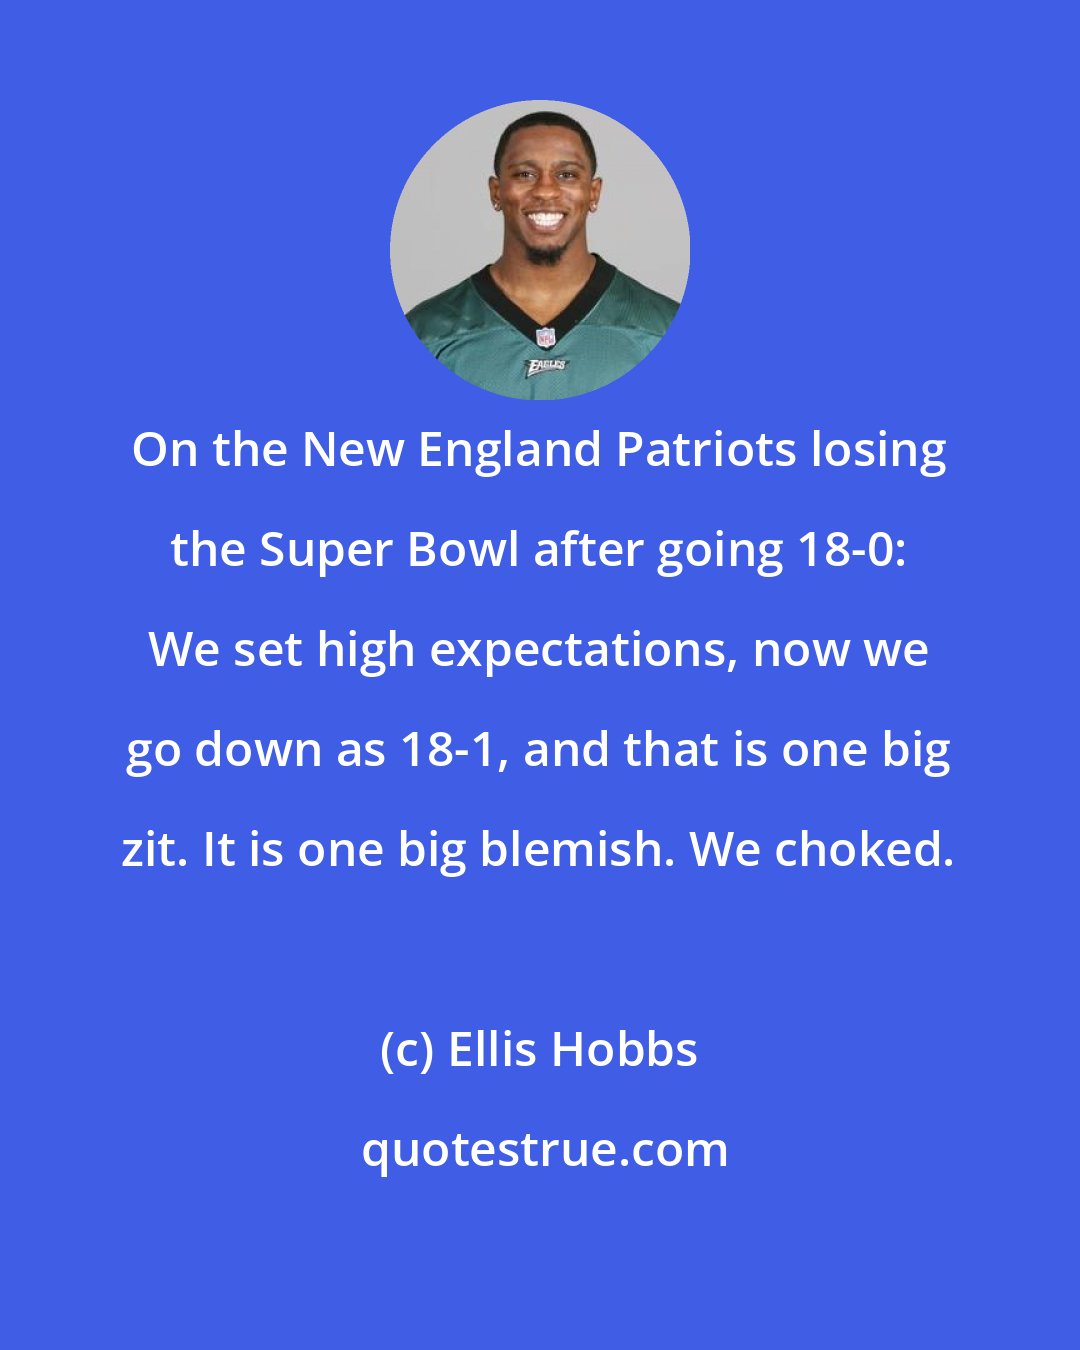 Ellis Hobbs: On the New England Patriots losing the Super Bowl after going 18-0: We set high expectations, now we go down as 18-1, and that is one big zit. It is one big blemish. We choked.